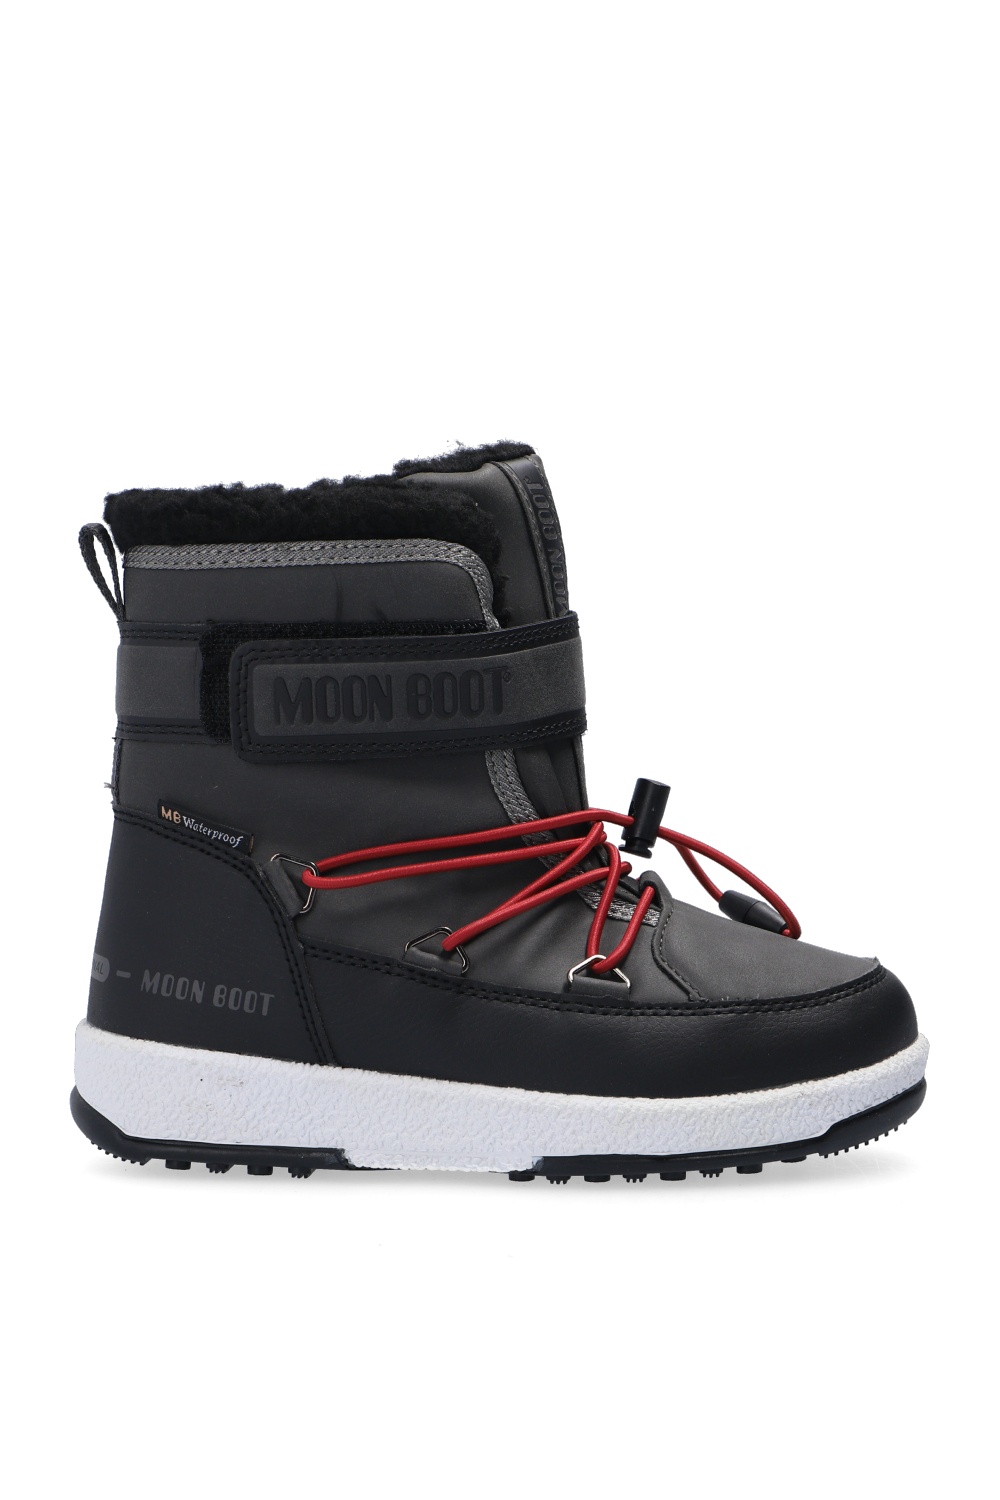 nike youth snow boots